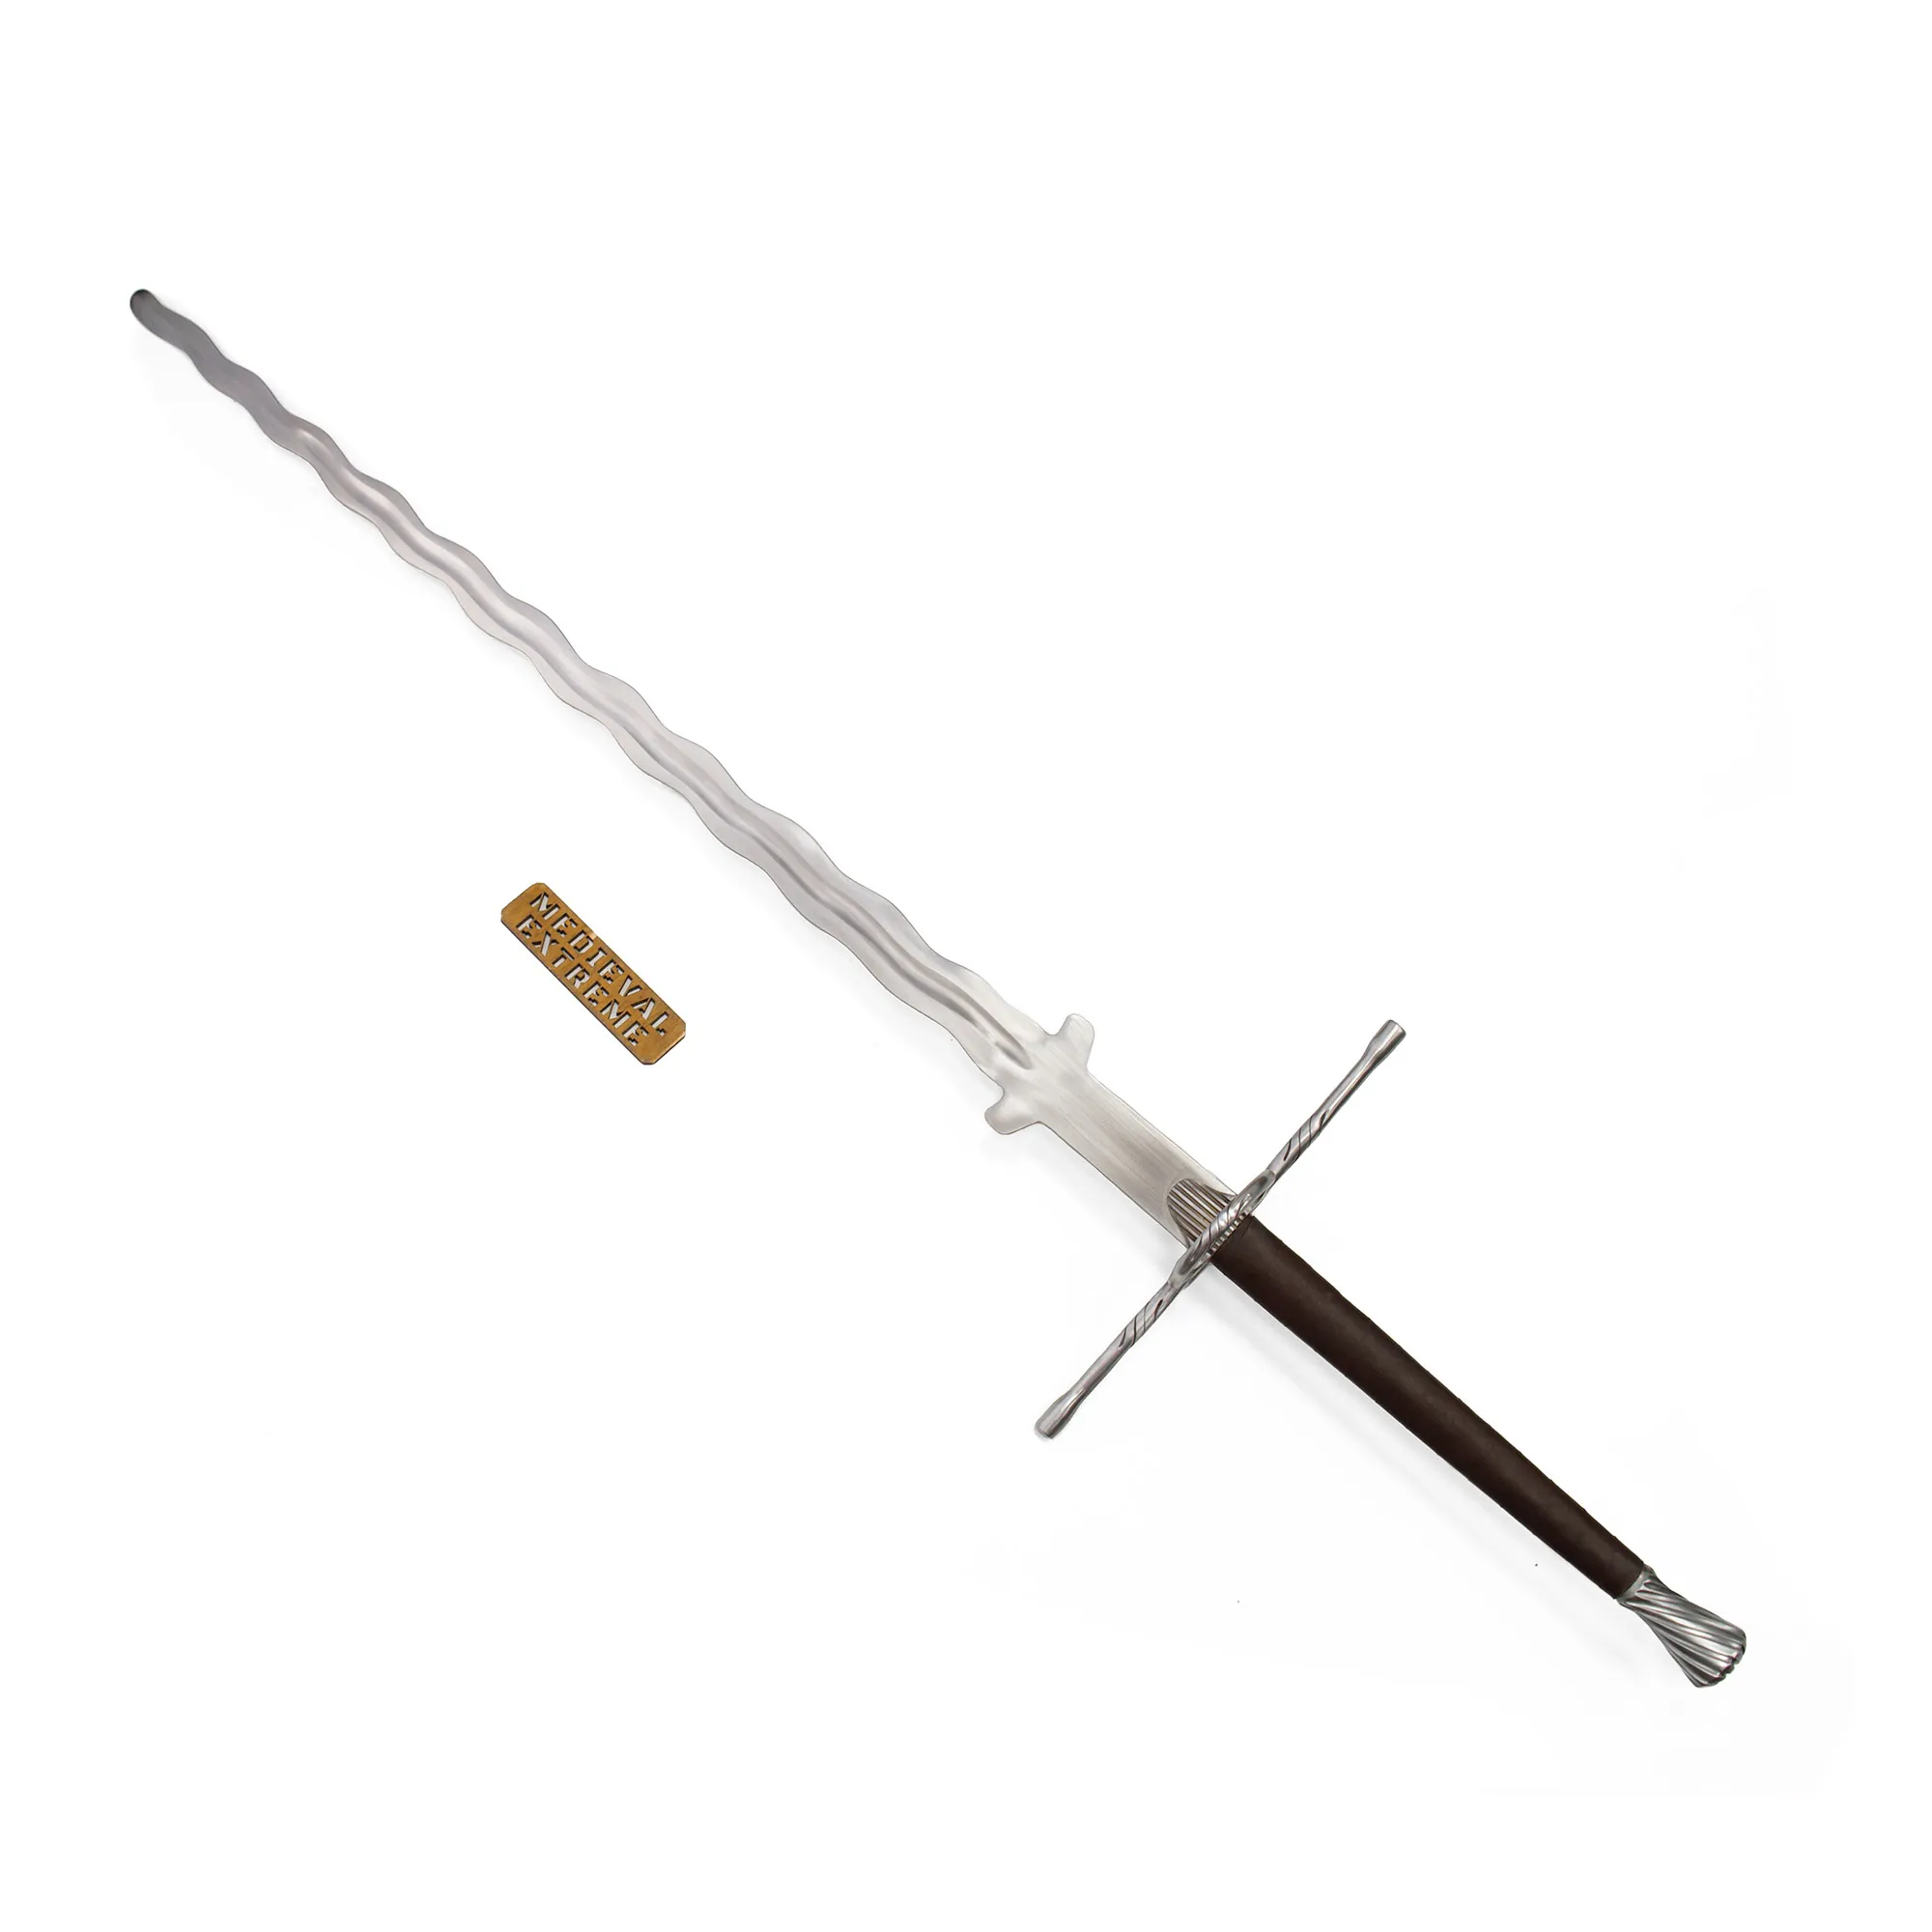 Advanced flamberge two-handed sword full length